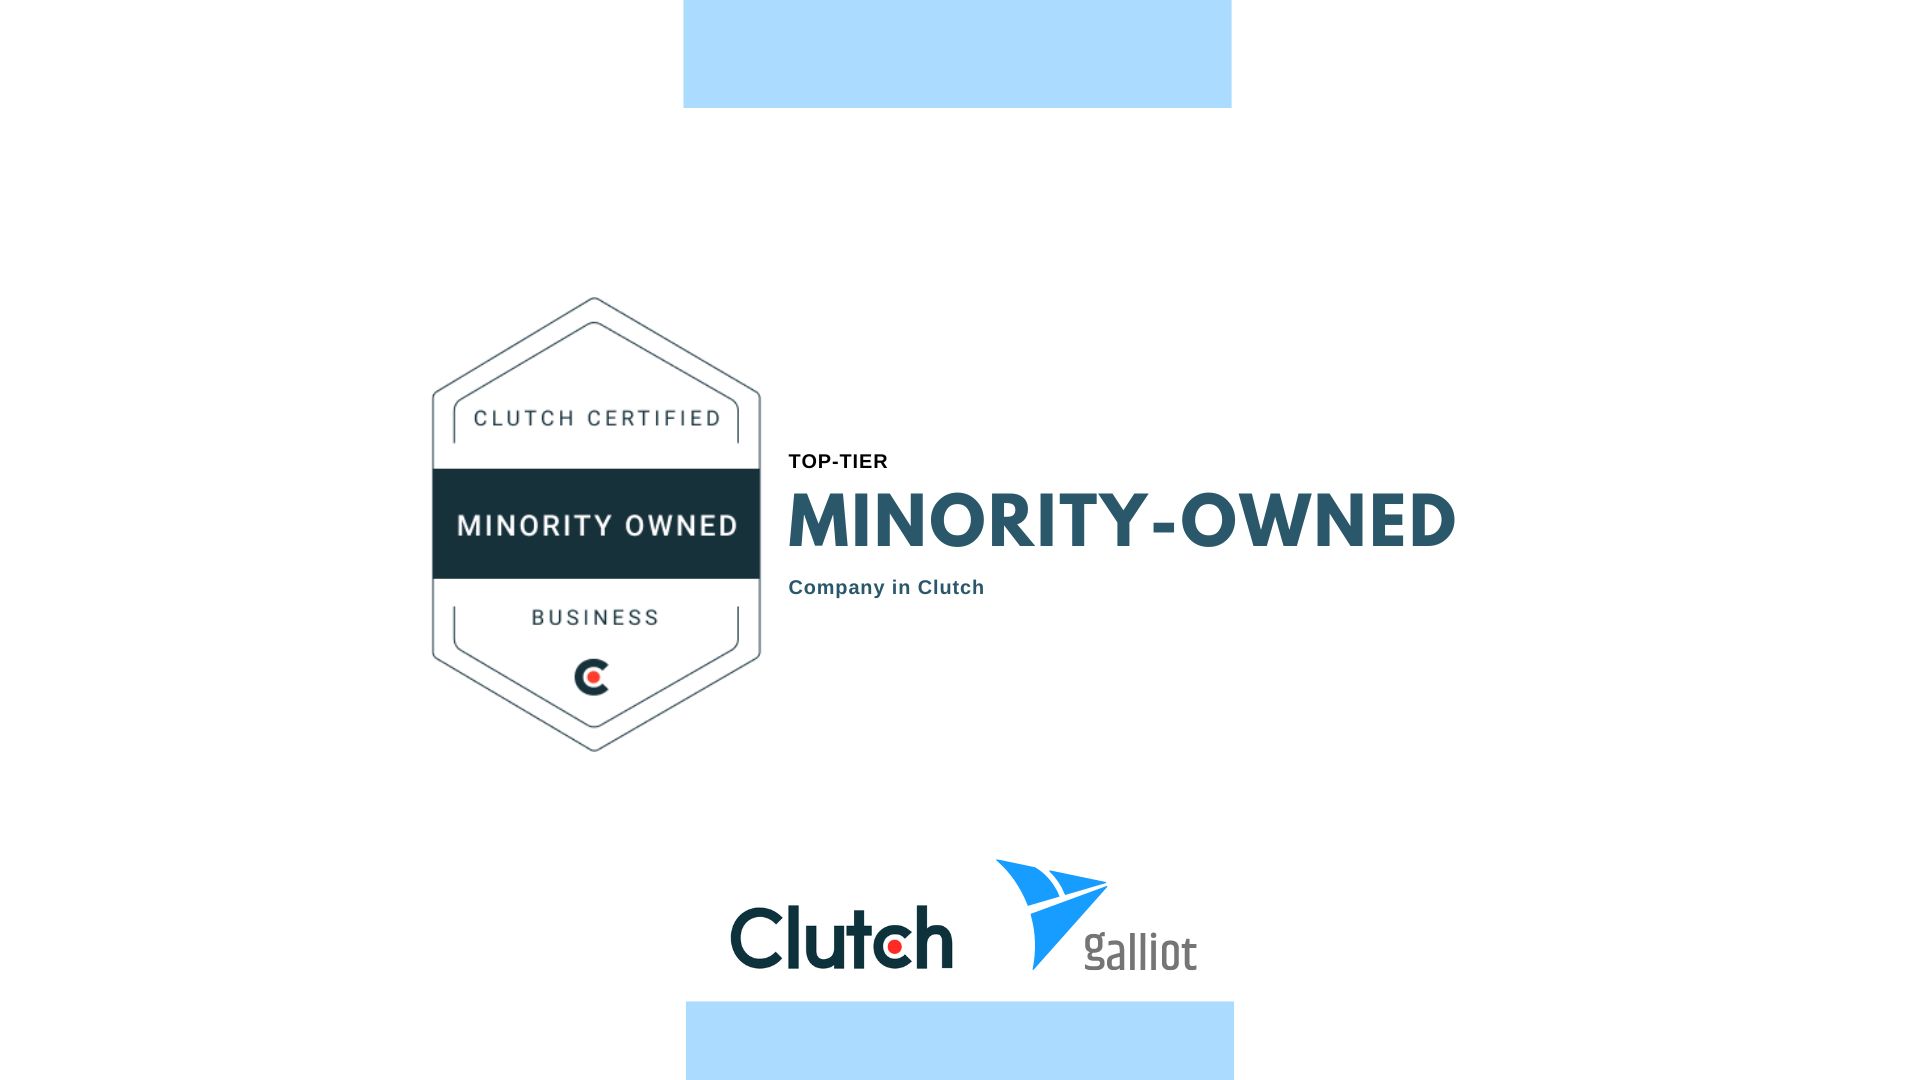 Clutch Certified Galliot as a Top-Tier Minority-owned Software Company